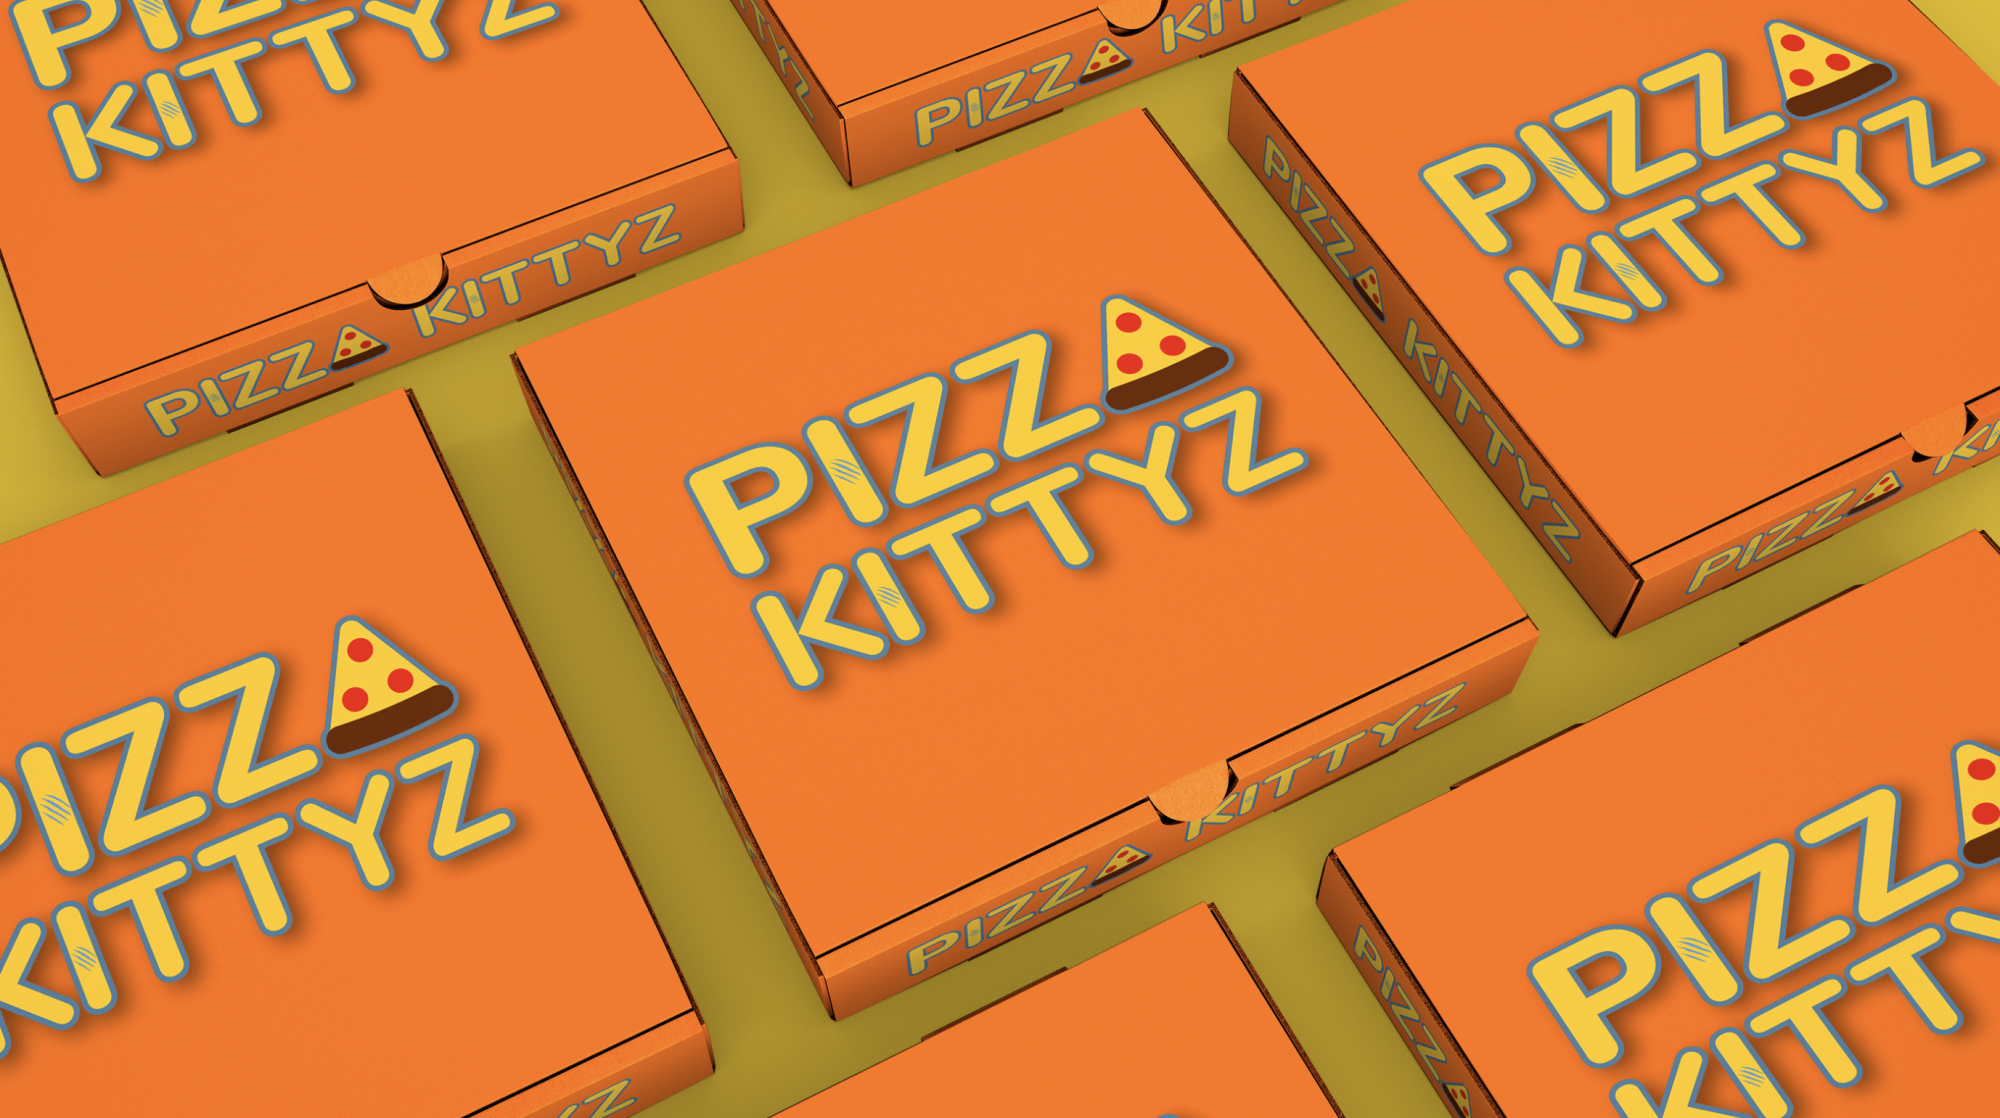 Mockup of pizza boxes for Pizza Kittyz fictional brand created by B.F.A. Design student Luis Angeles